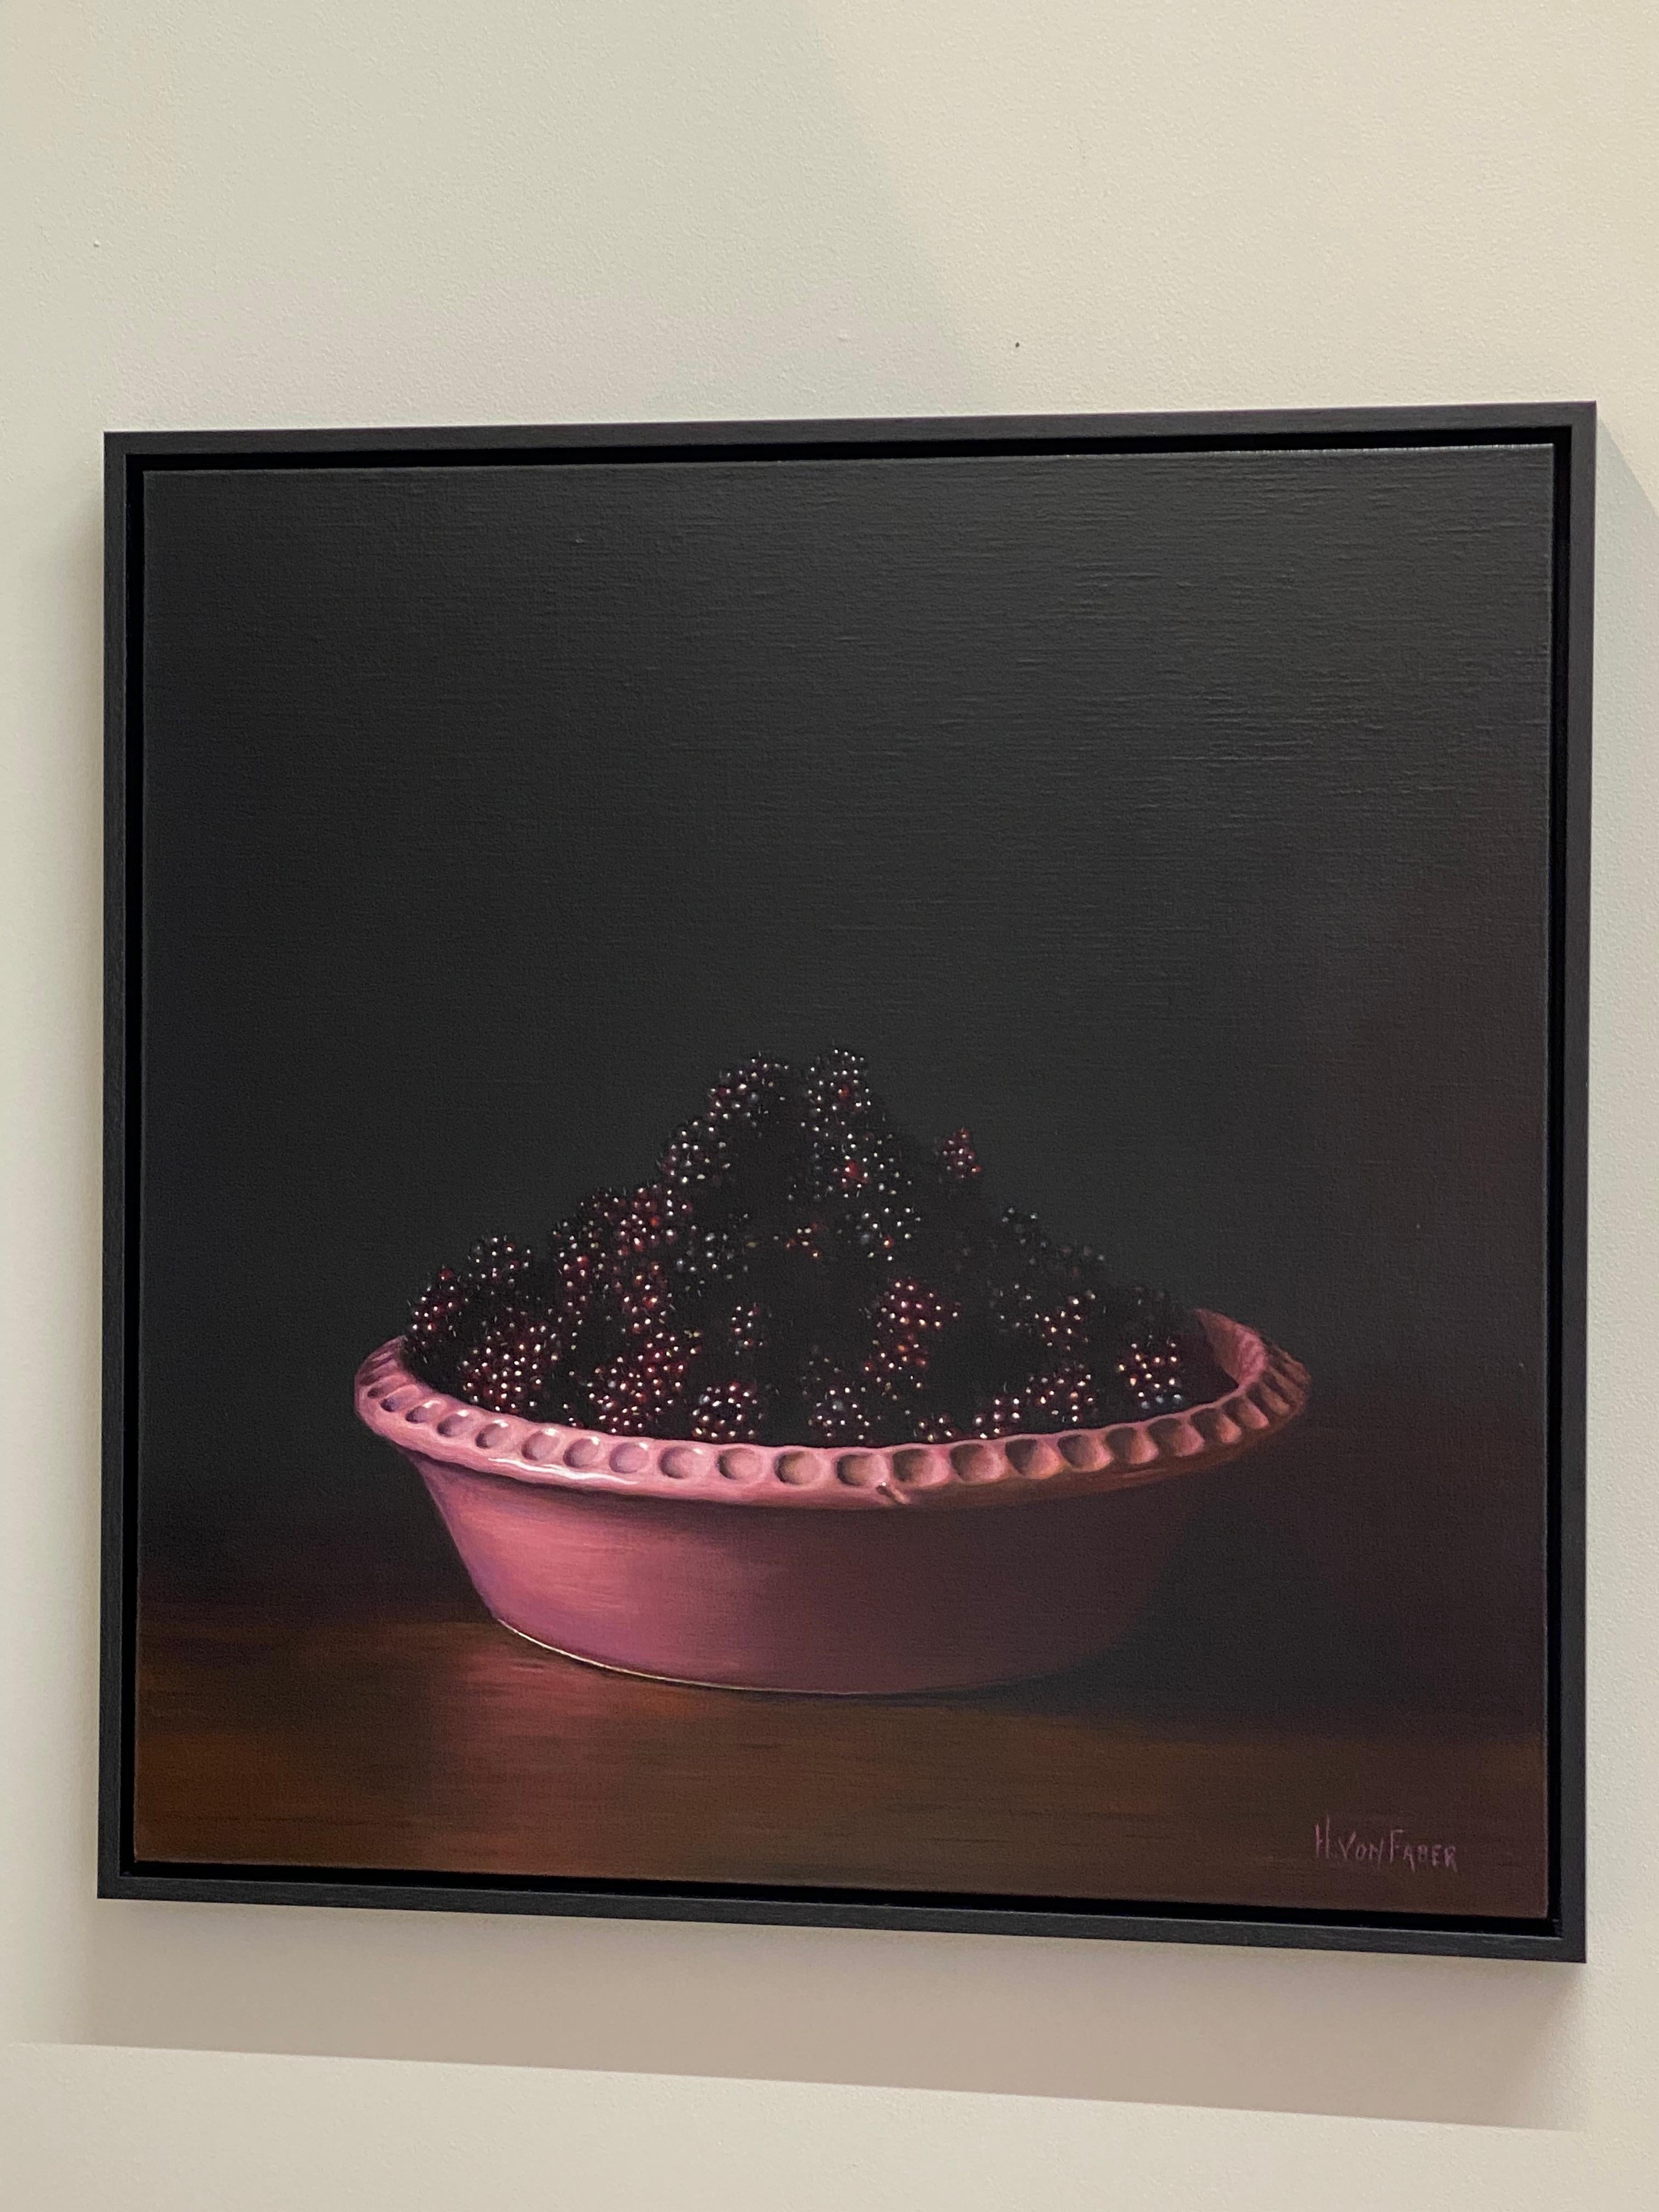 Blueberries in Pink Bowl- 21st Contemporary Dutch Realistic Still-life painting  - Black Figurative Painting by Heidi von Faber